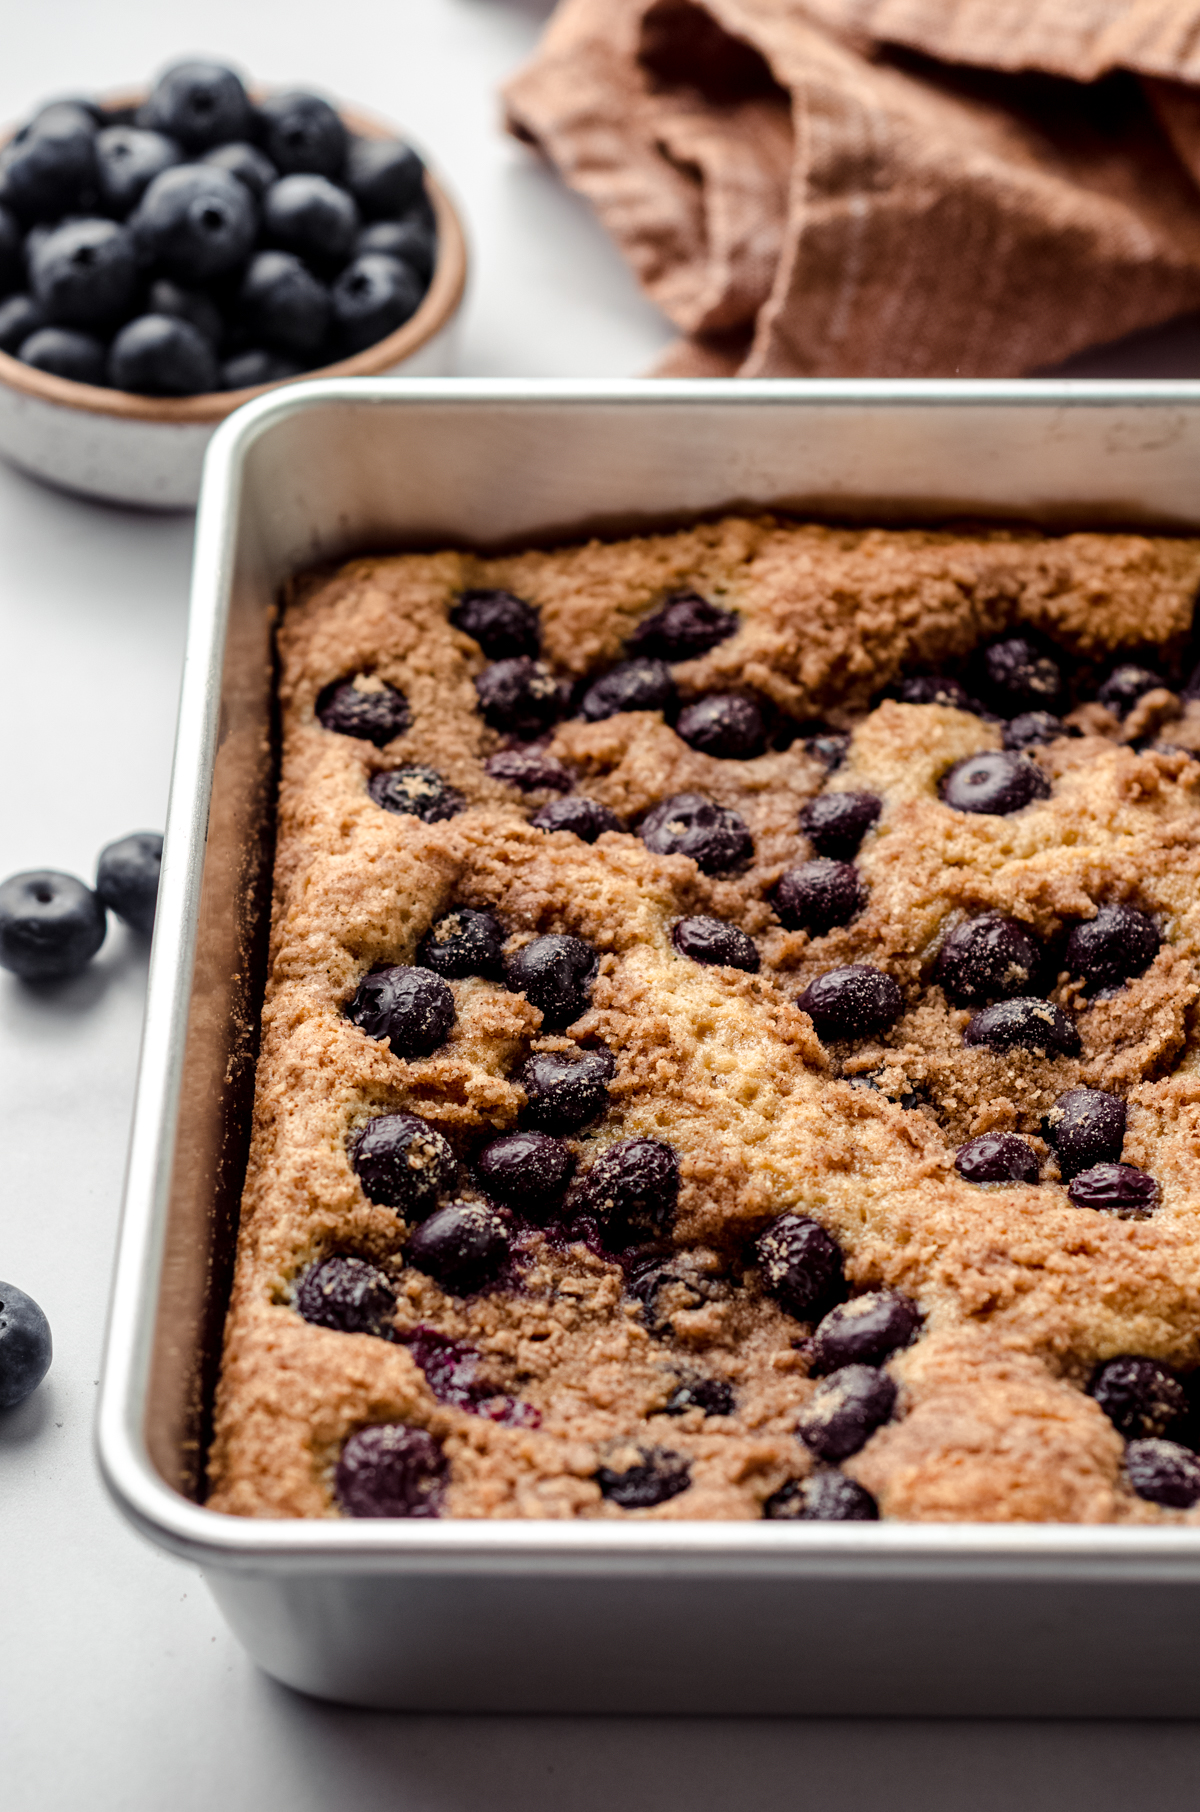 Blueberry sour cream coffee cake in a baking pan.